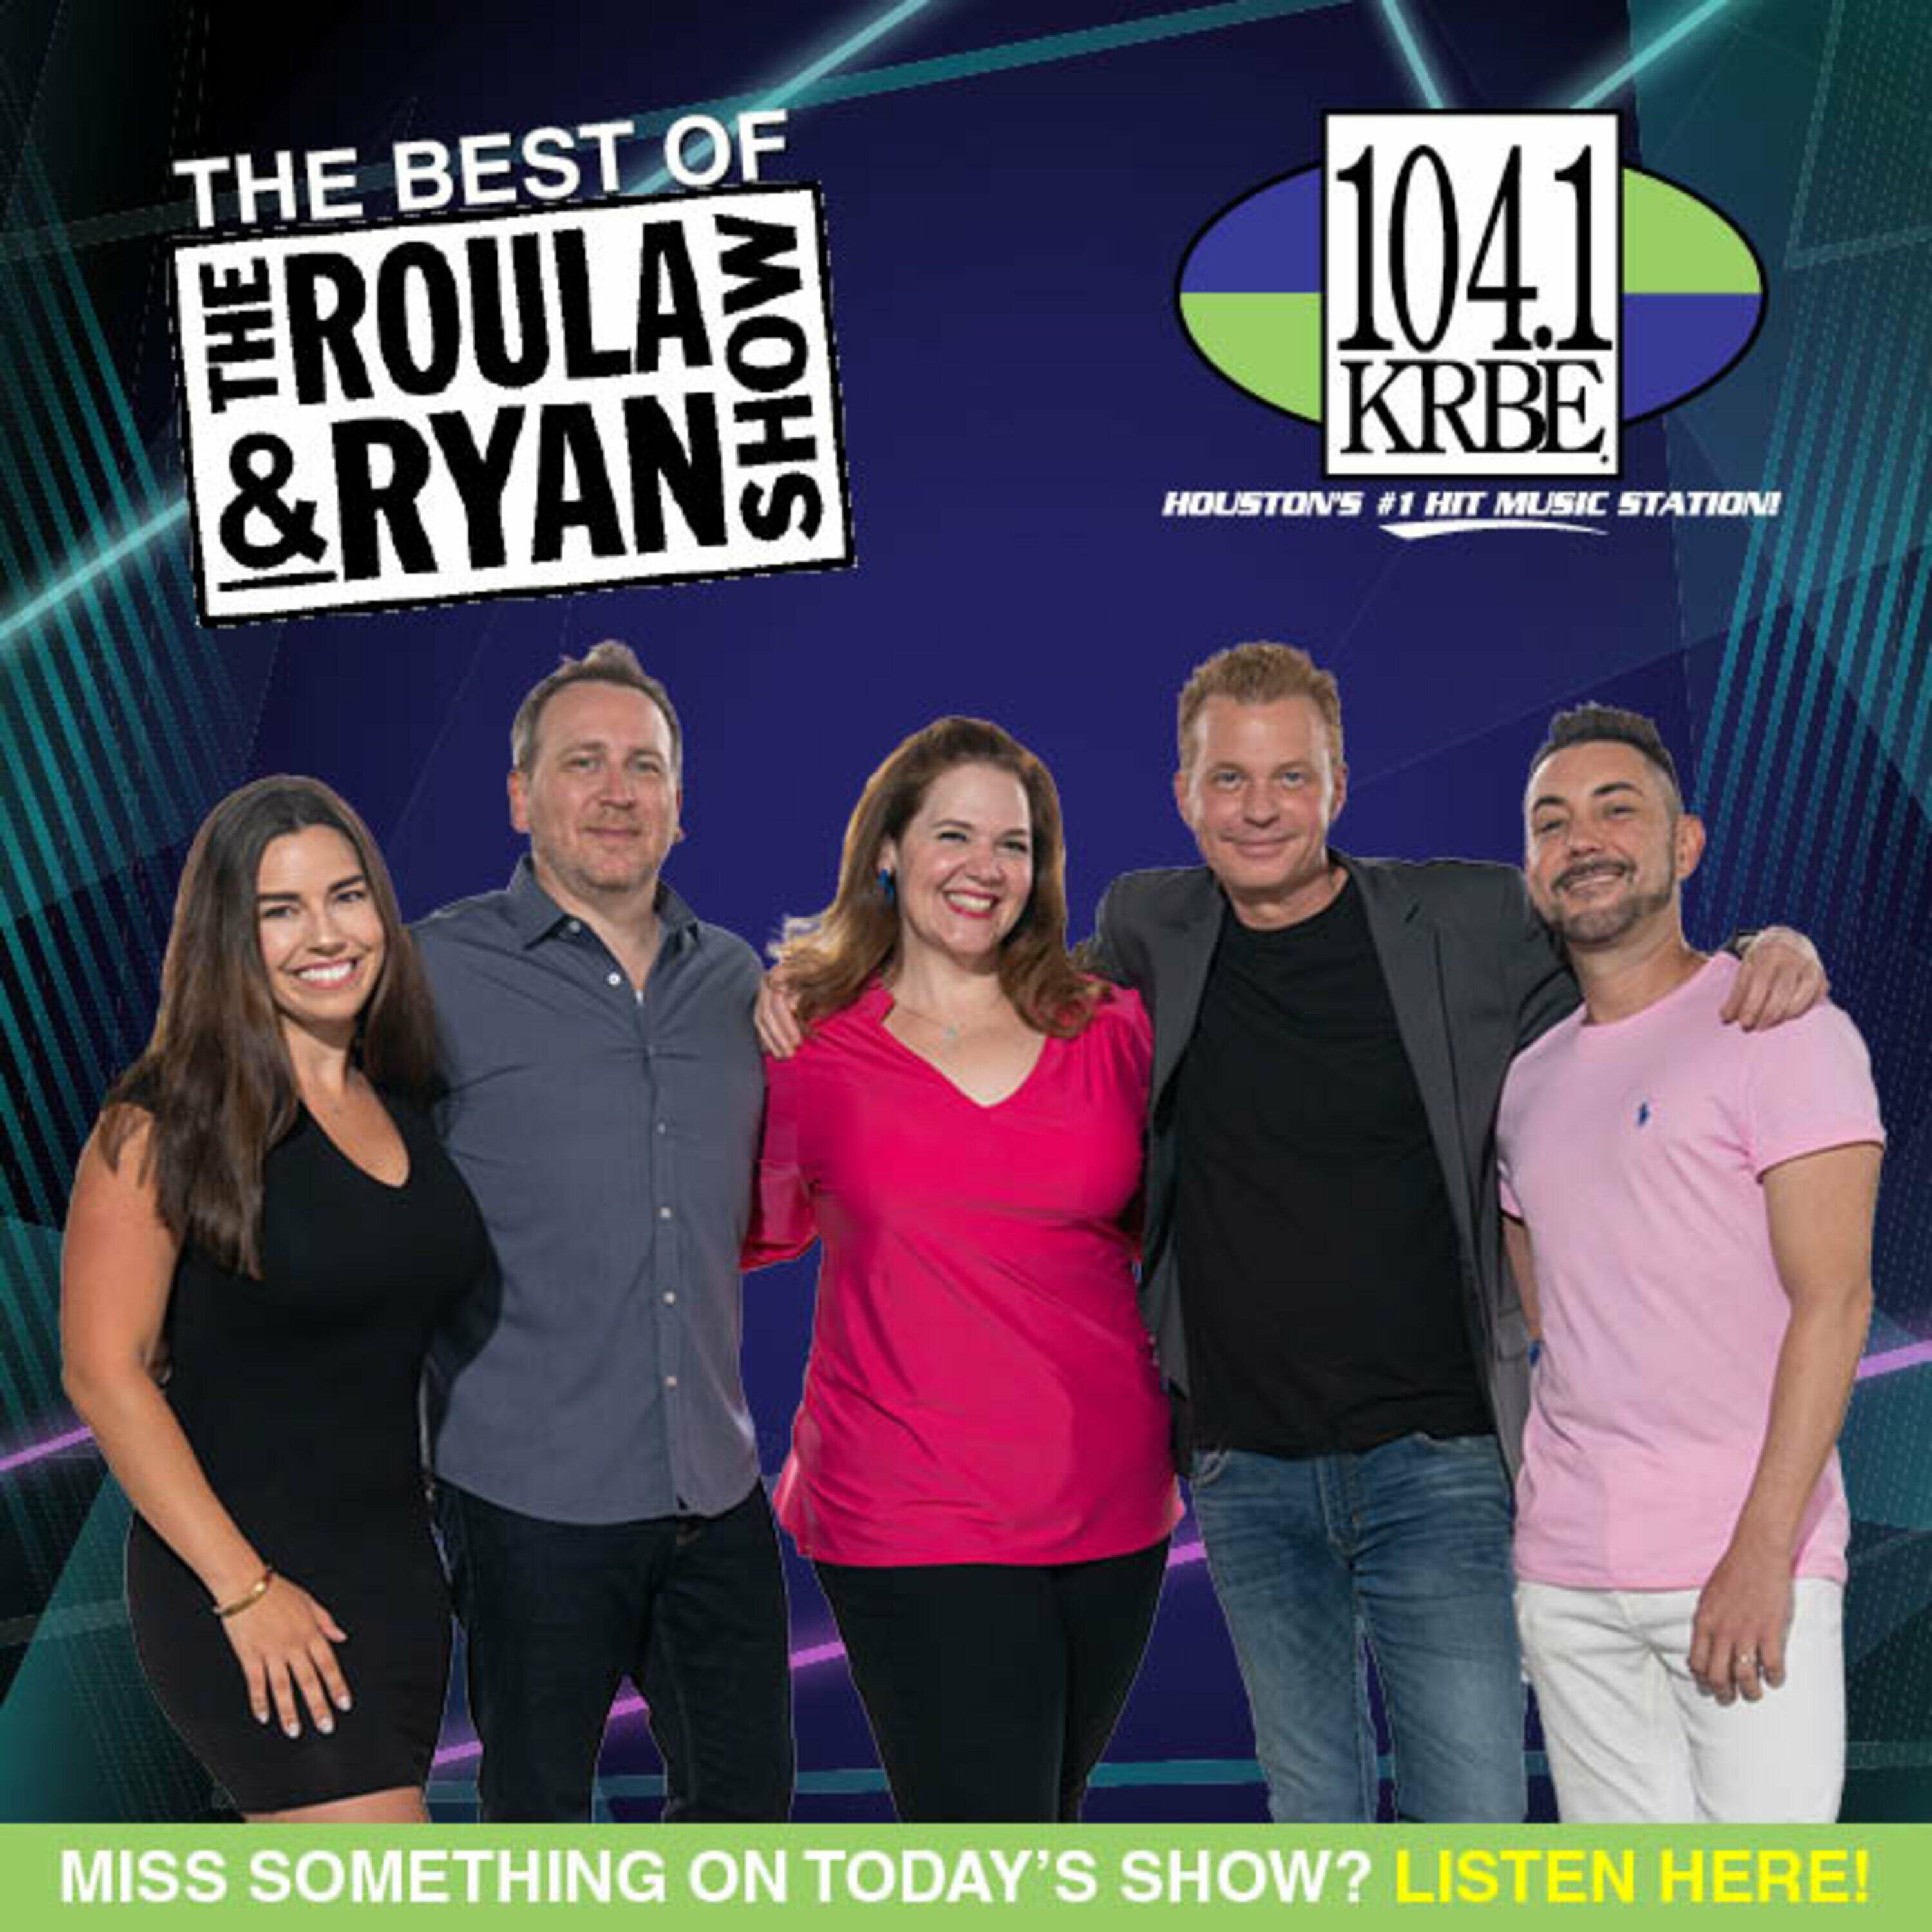 Listen to the Best of Roula & Ryan Episode - 6 am: Show Opening: Open p...